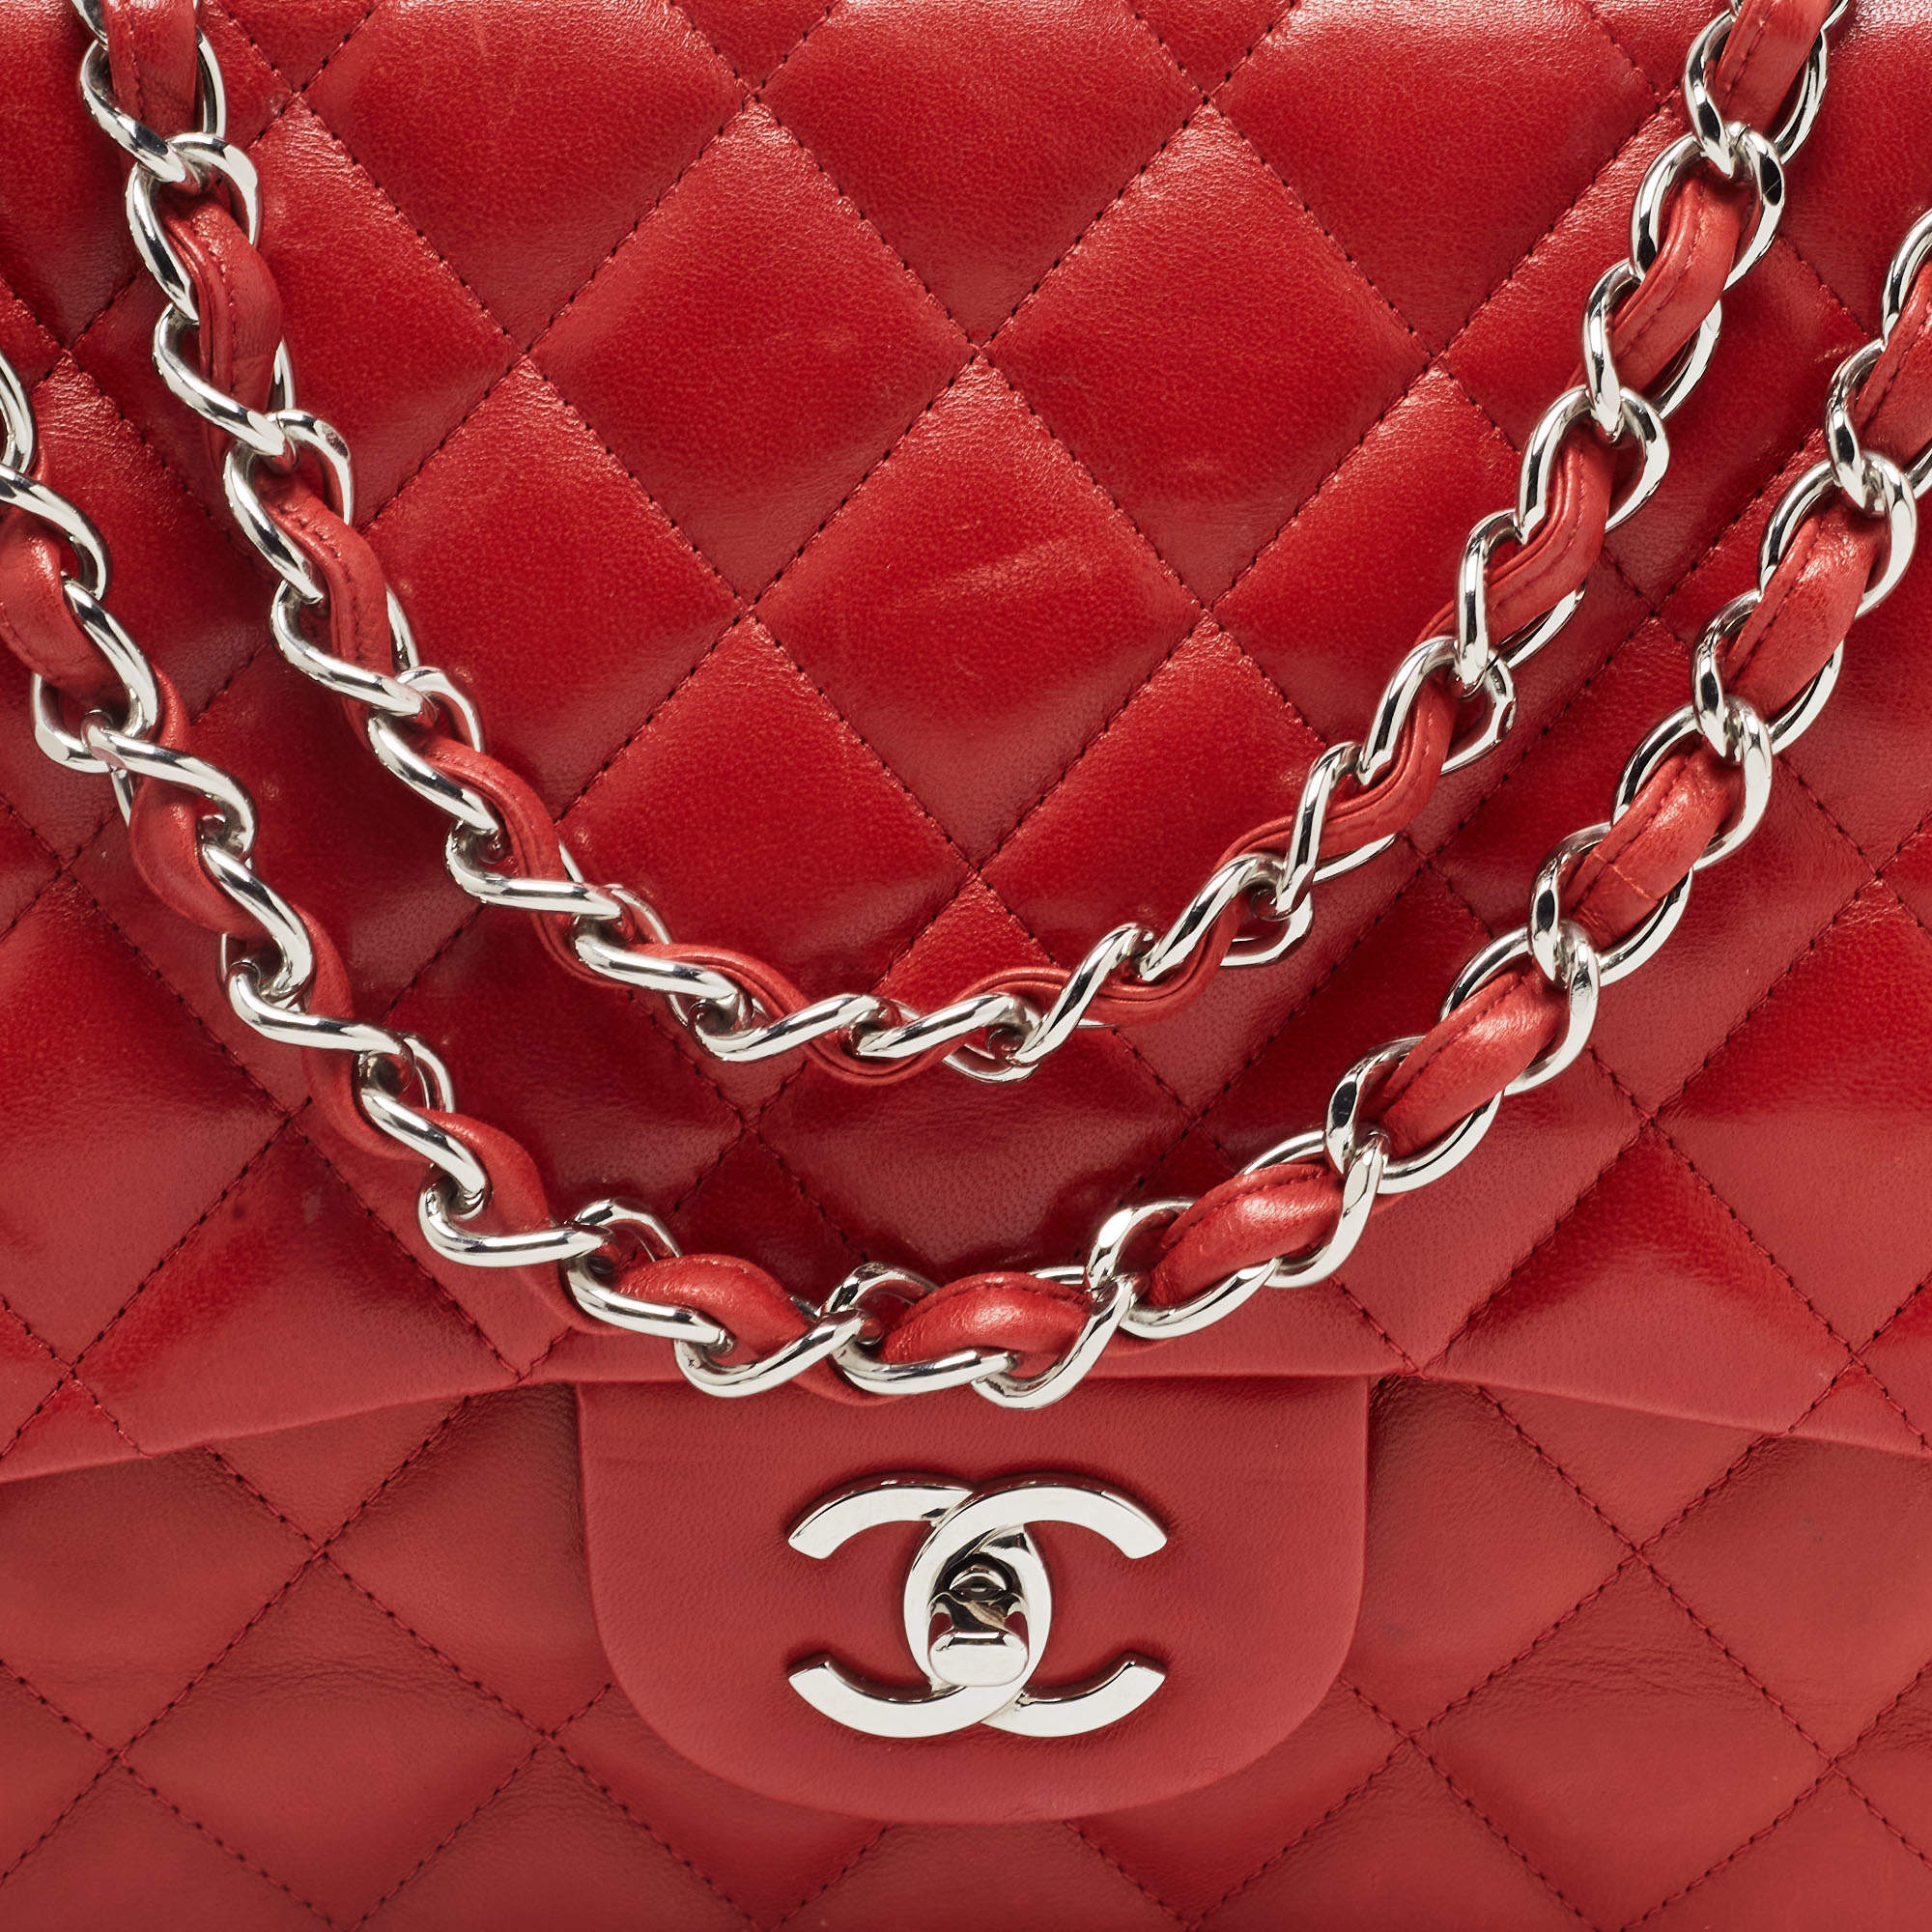 pink chanel double flap